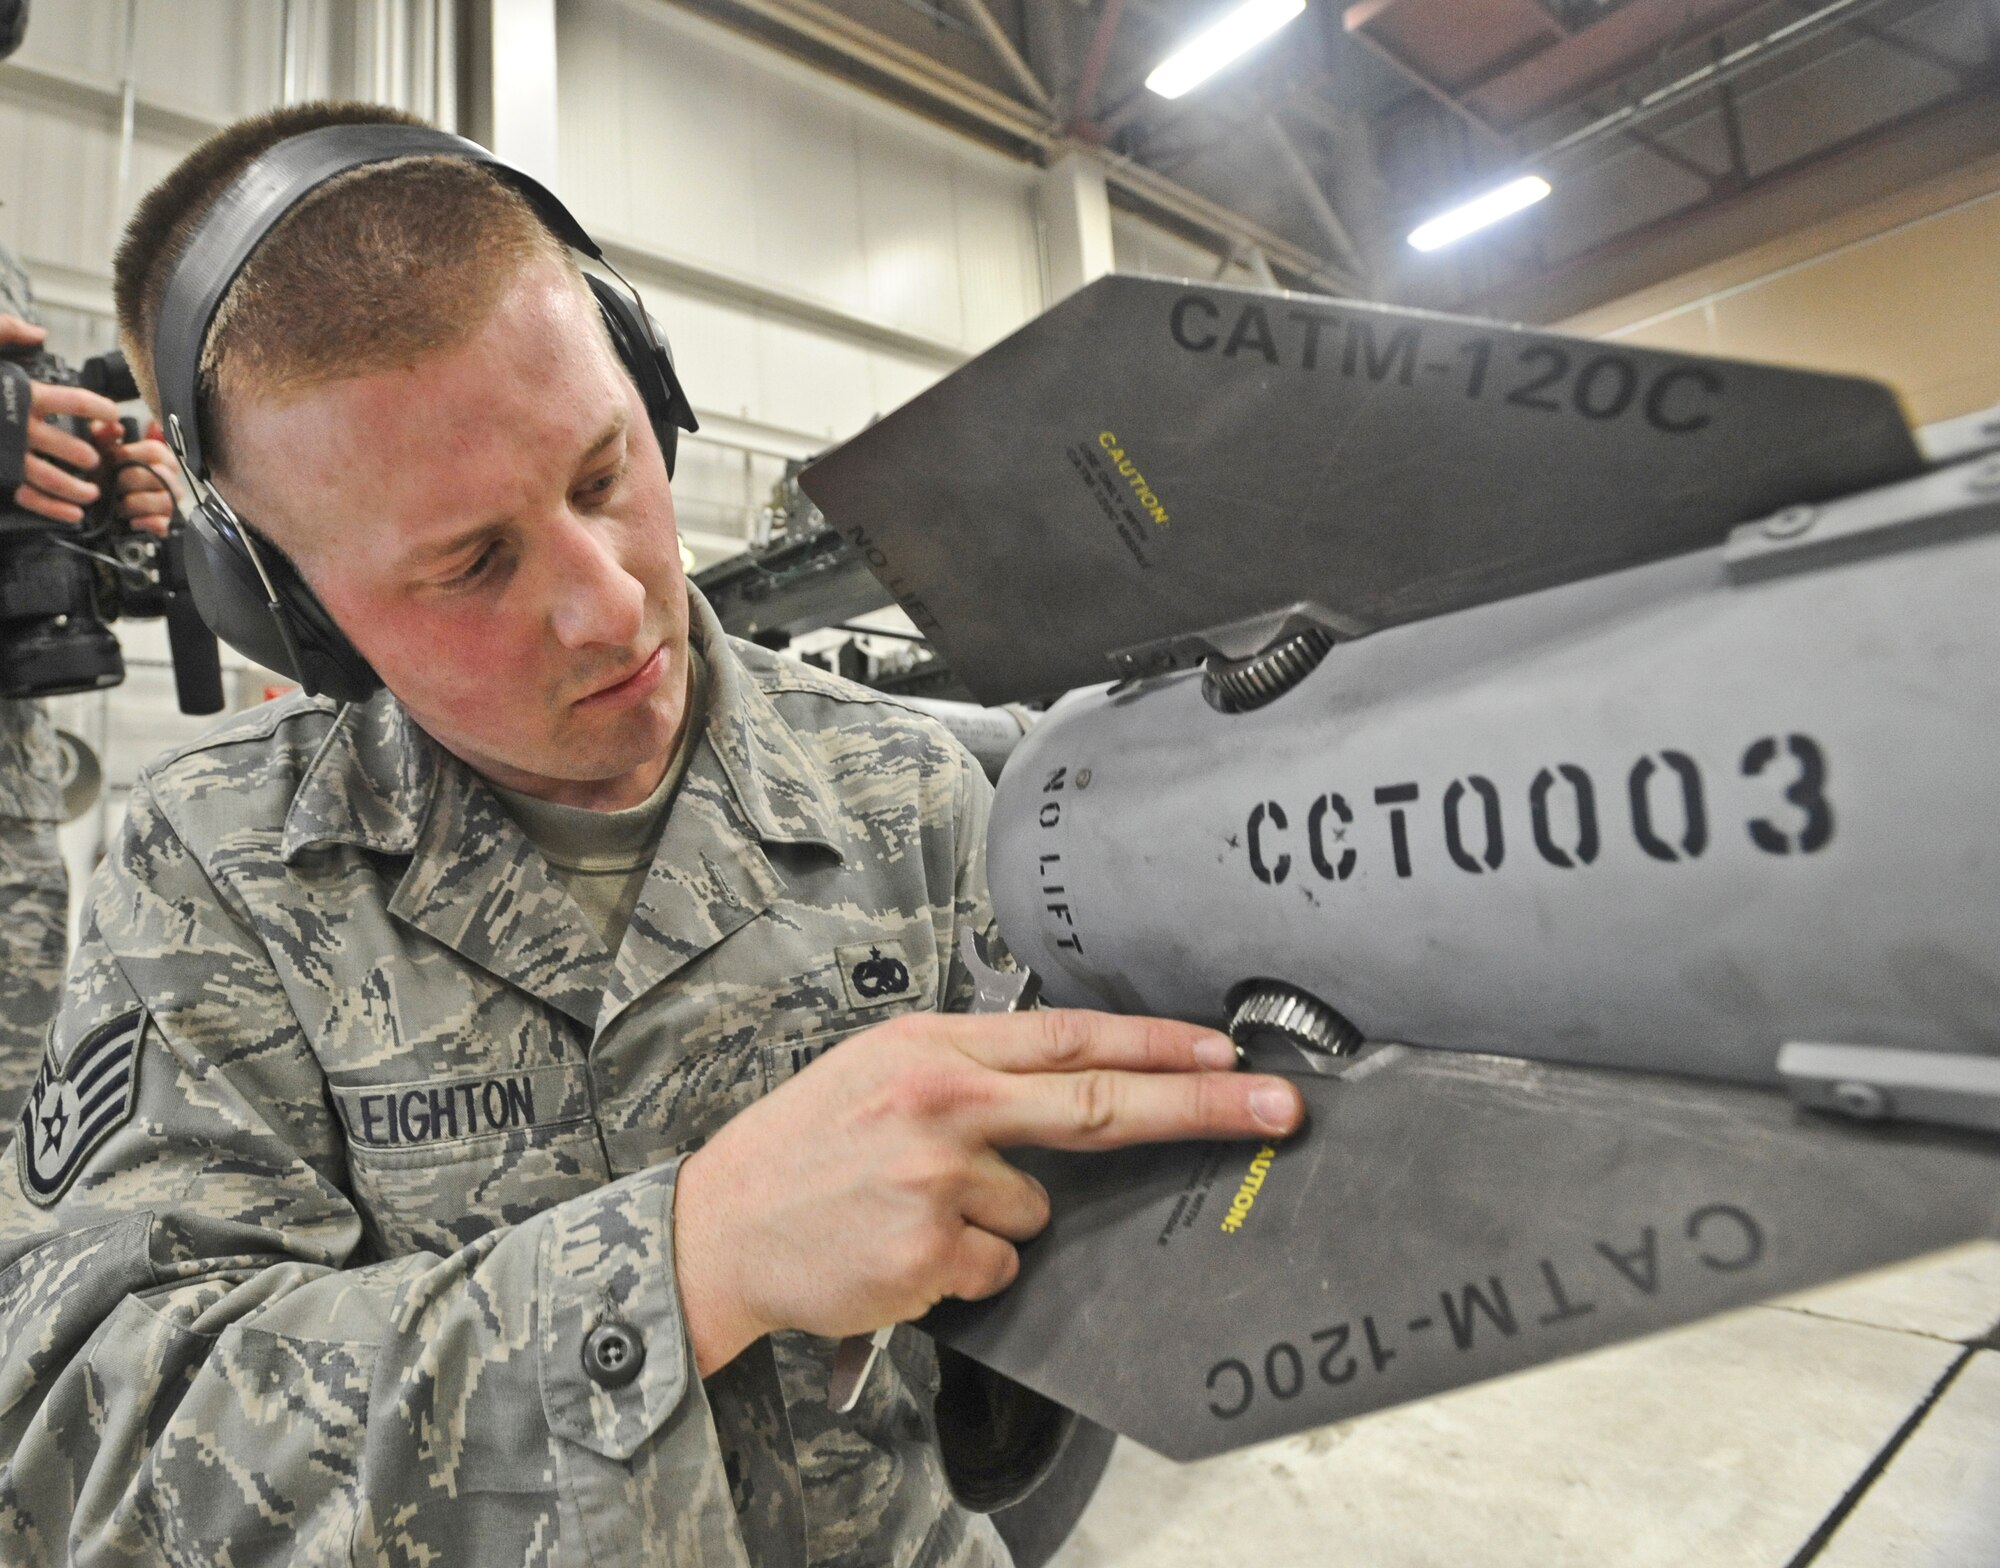 ELMENDORF AIR FORCE BASE, Alaska -- Staff Sgt. Jason Leighton, 90th Aircraft Maintenance Unit, examines a missile before loading it with his crew onto a F-22 during a load crew inspection March 11, 2009. Leighton is a 2009 Lt. Gen. Leo Marquez Award winner in the Munitions/Missile Technician Supervisor Category. The Marquez Award is one of the hightest honors for a maintainer at Air Force level. (U.S. Air Force photo/Senior Airman Matthew Owens)